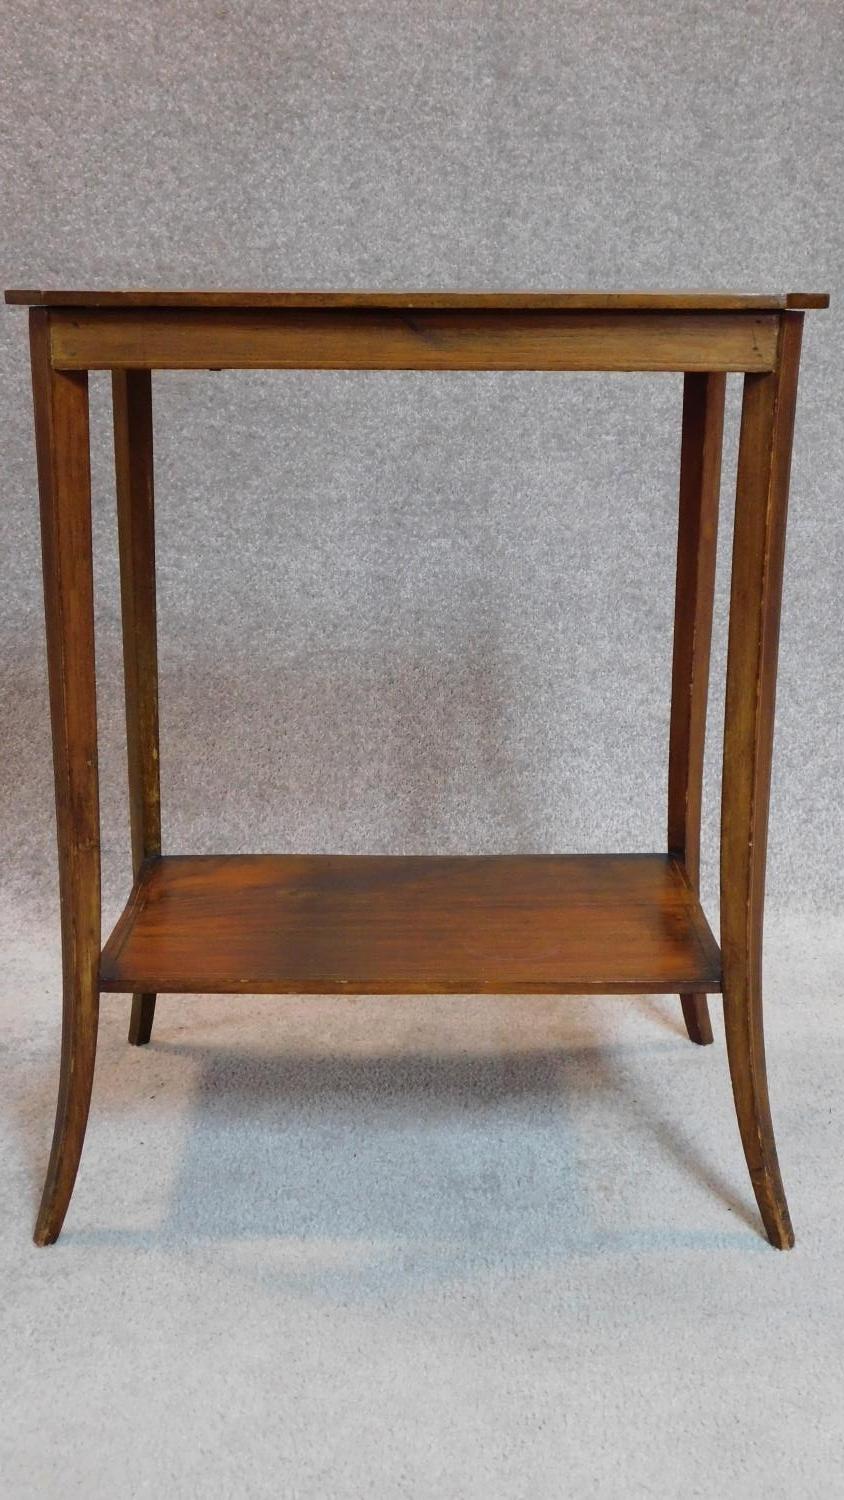 An Edwardian mahogany and satinwood inlaid 2 tier occasional table. 70x56x37cm - Image 2 of 4